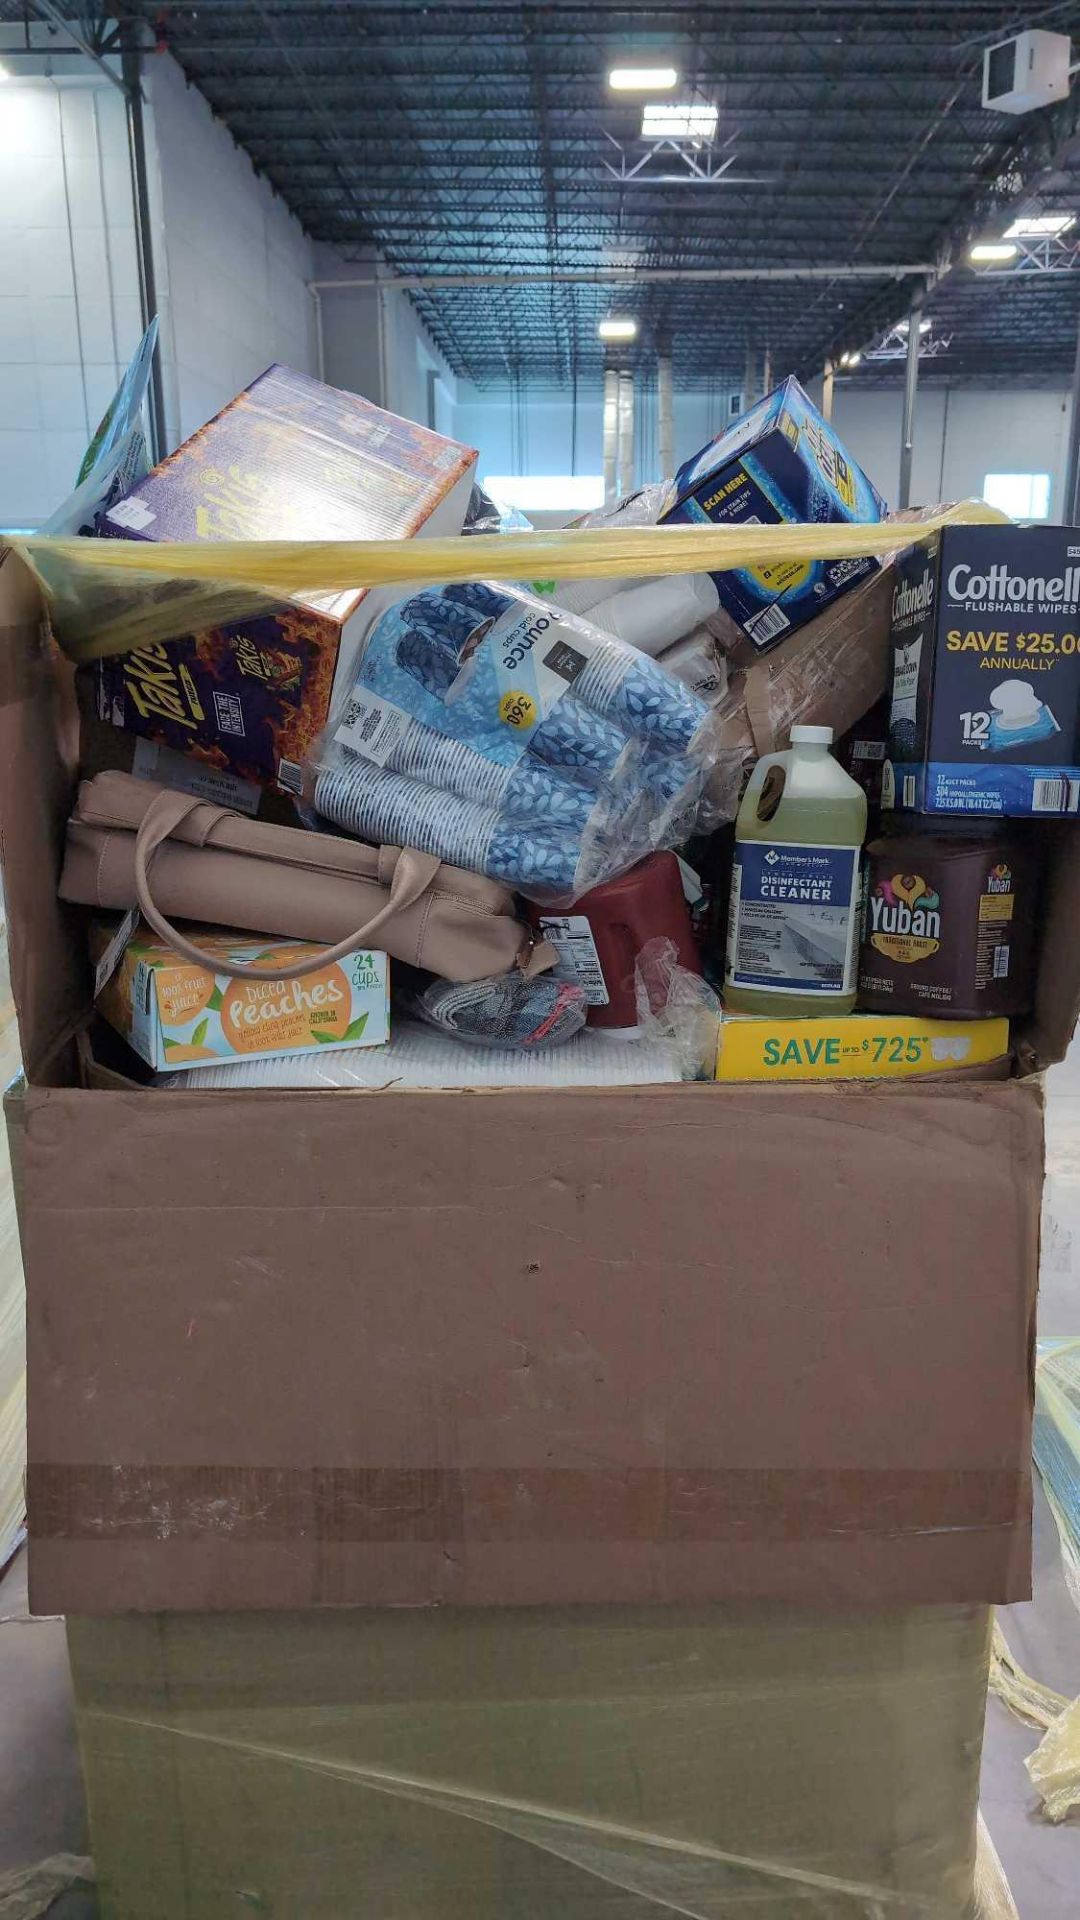 Big box store in a box: Folgers, Always wings, cups, downy, soap, wipes, yuban Coffee, pampers, ketc - Image 4 of 5